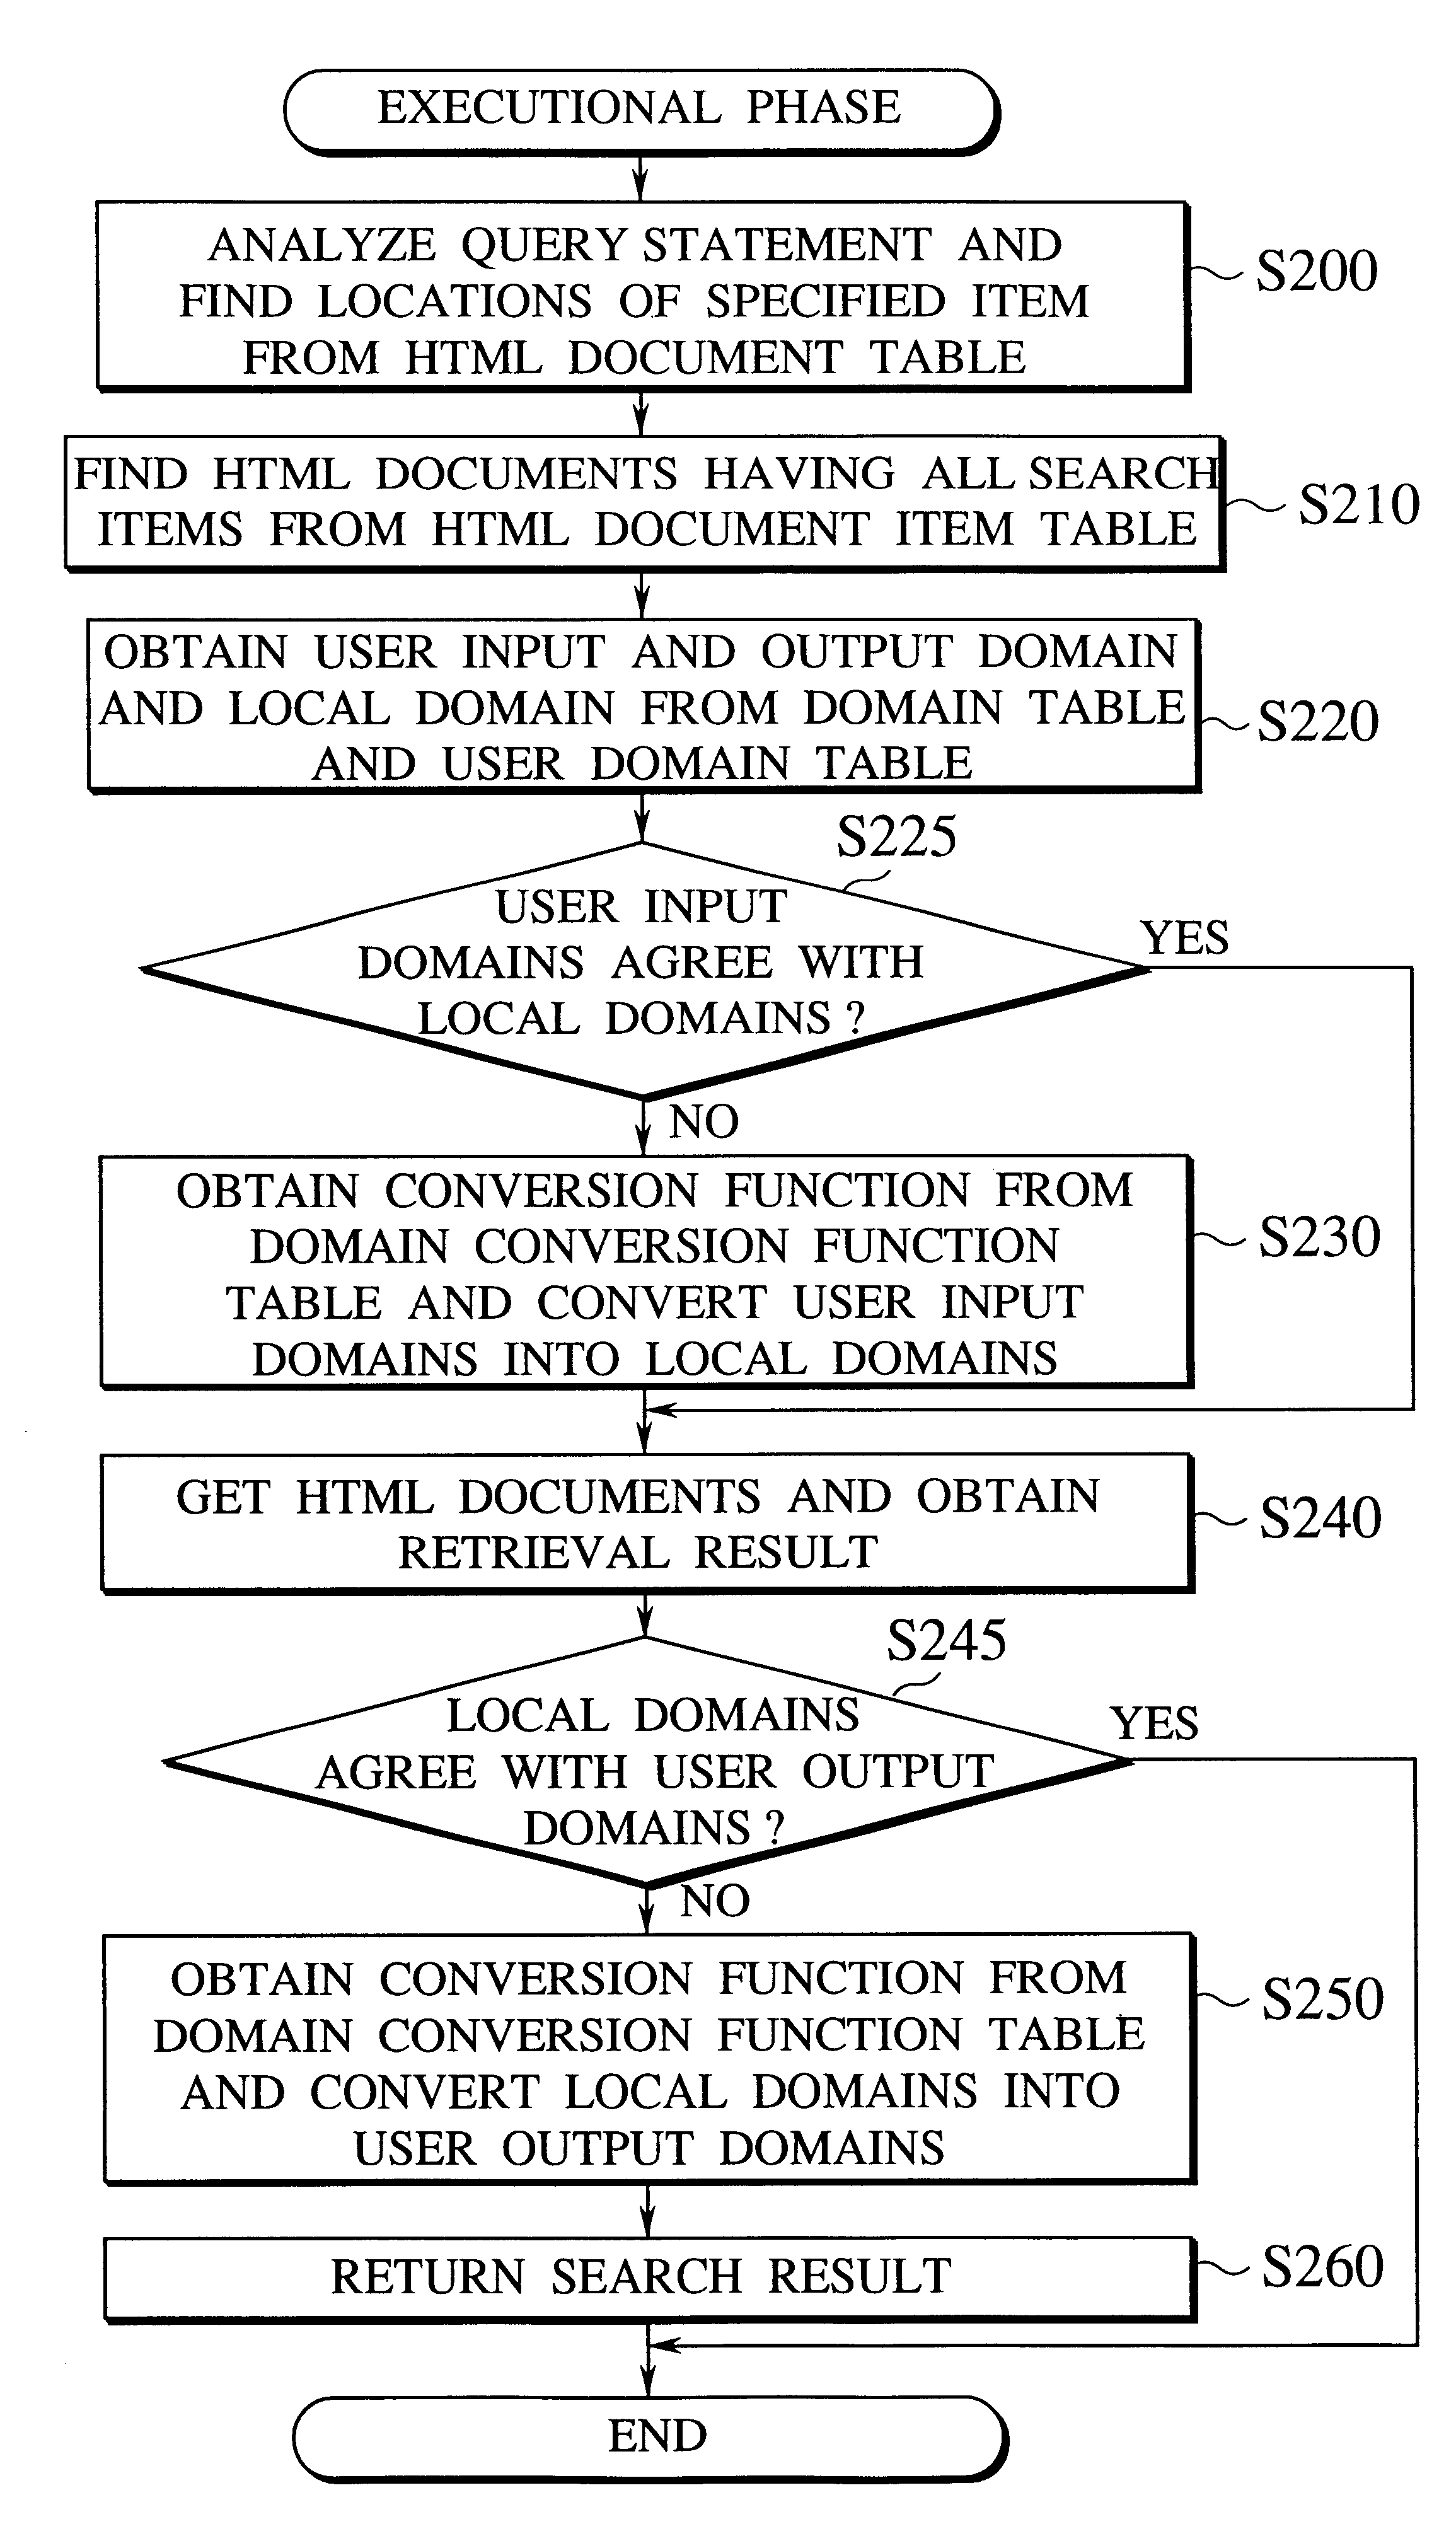 Integrated retrieval scheme for retrieving semi-structured documents